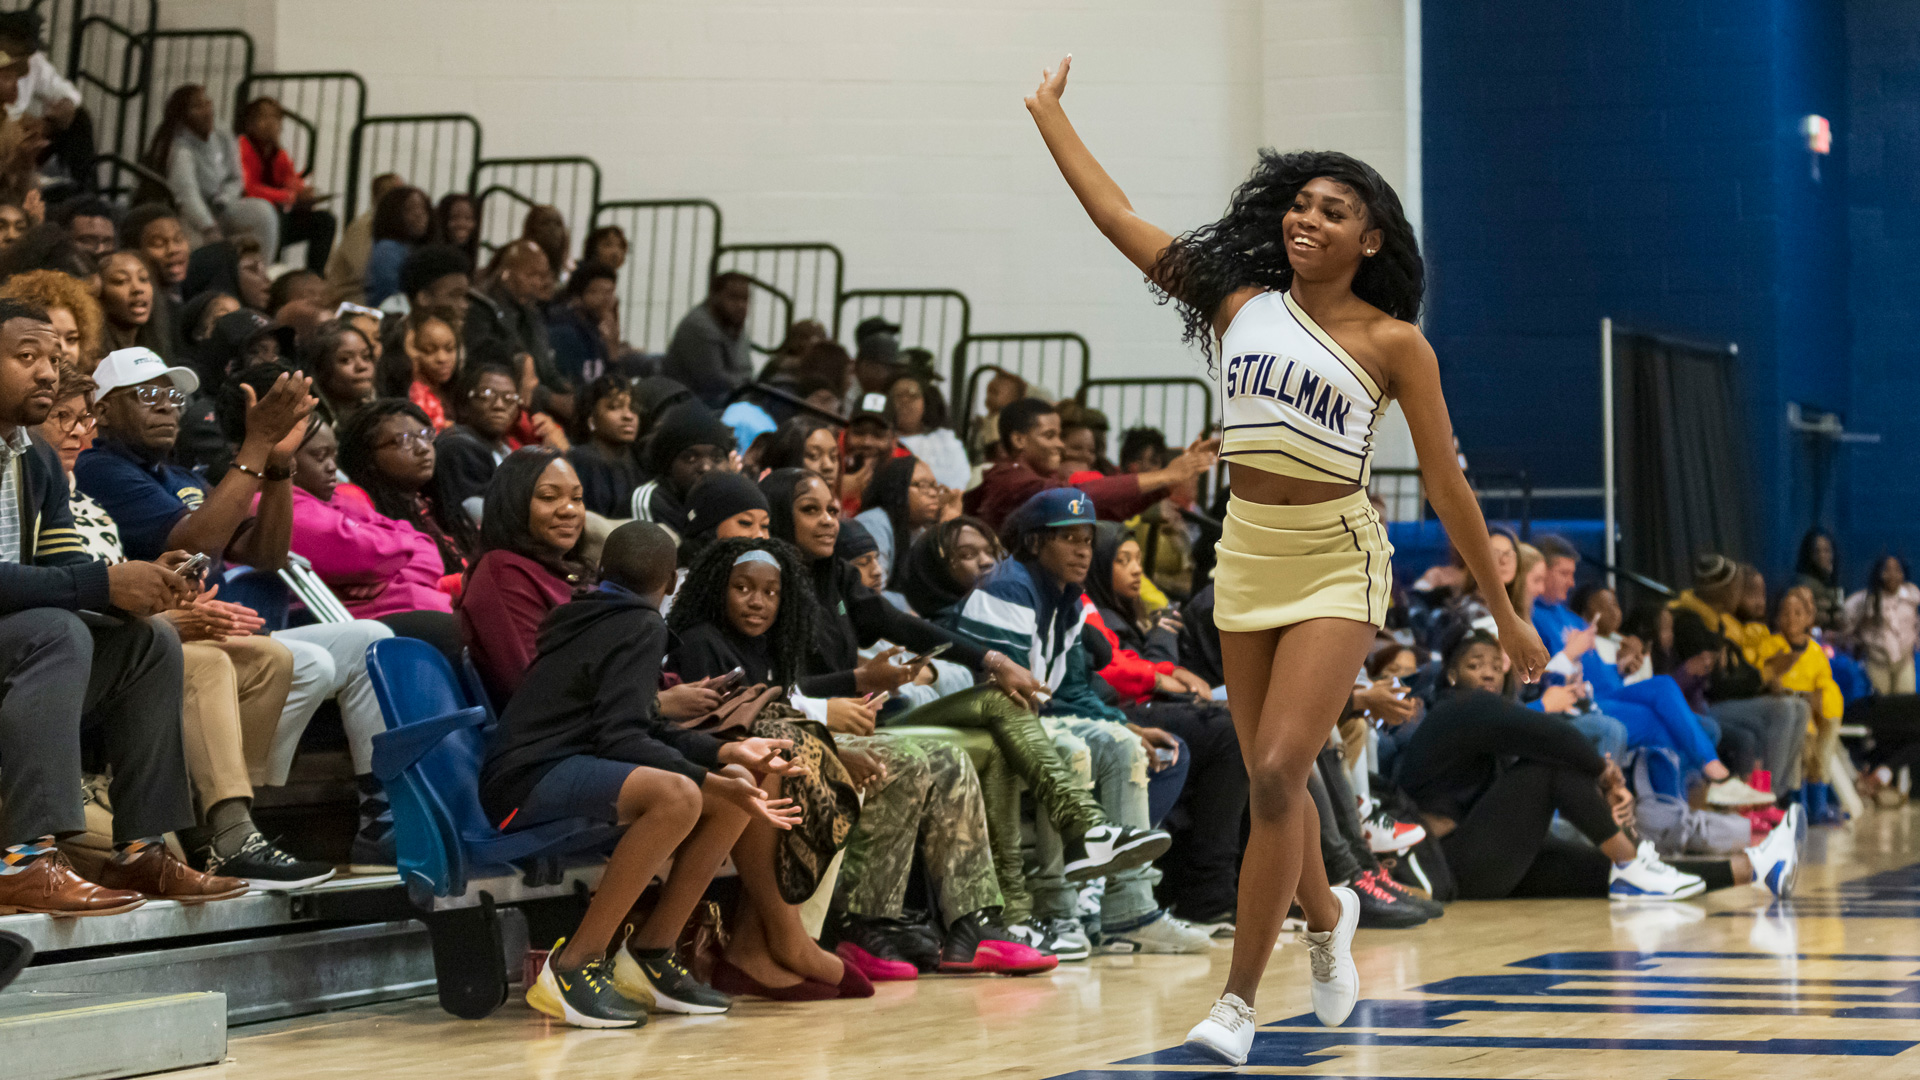 A black female college cheerleader waves to a crowd at a basketball game